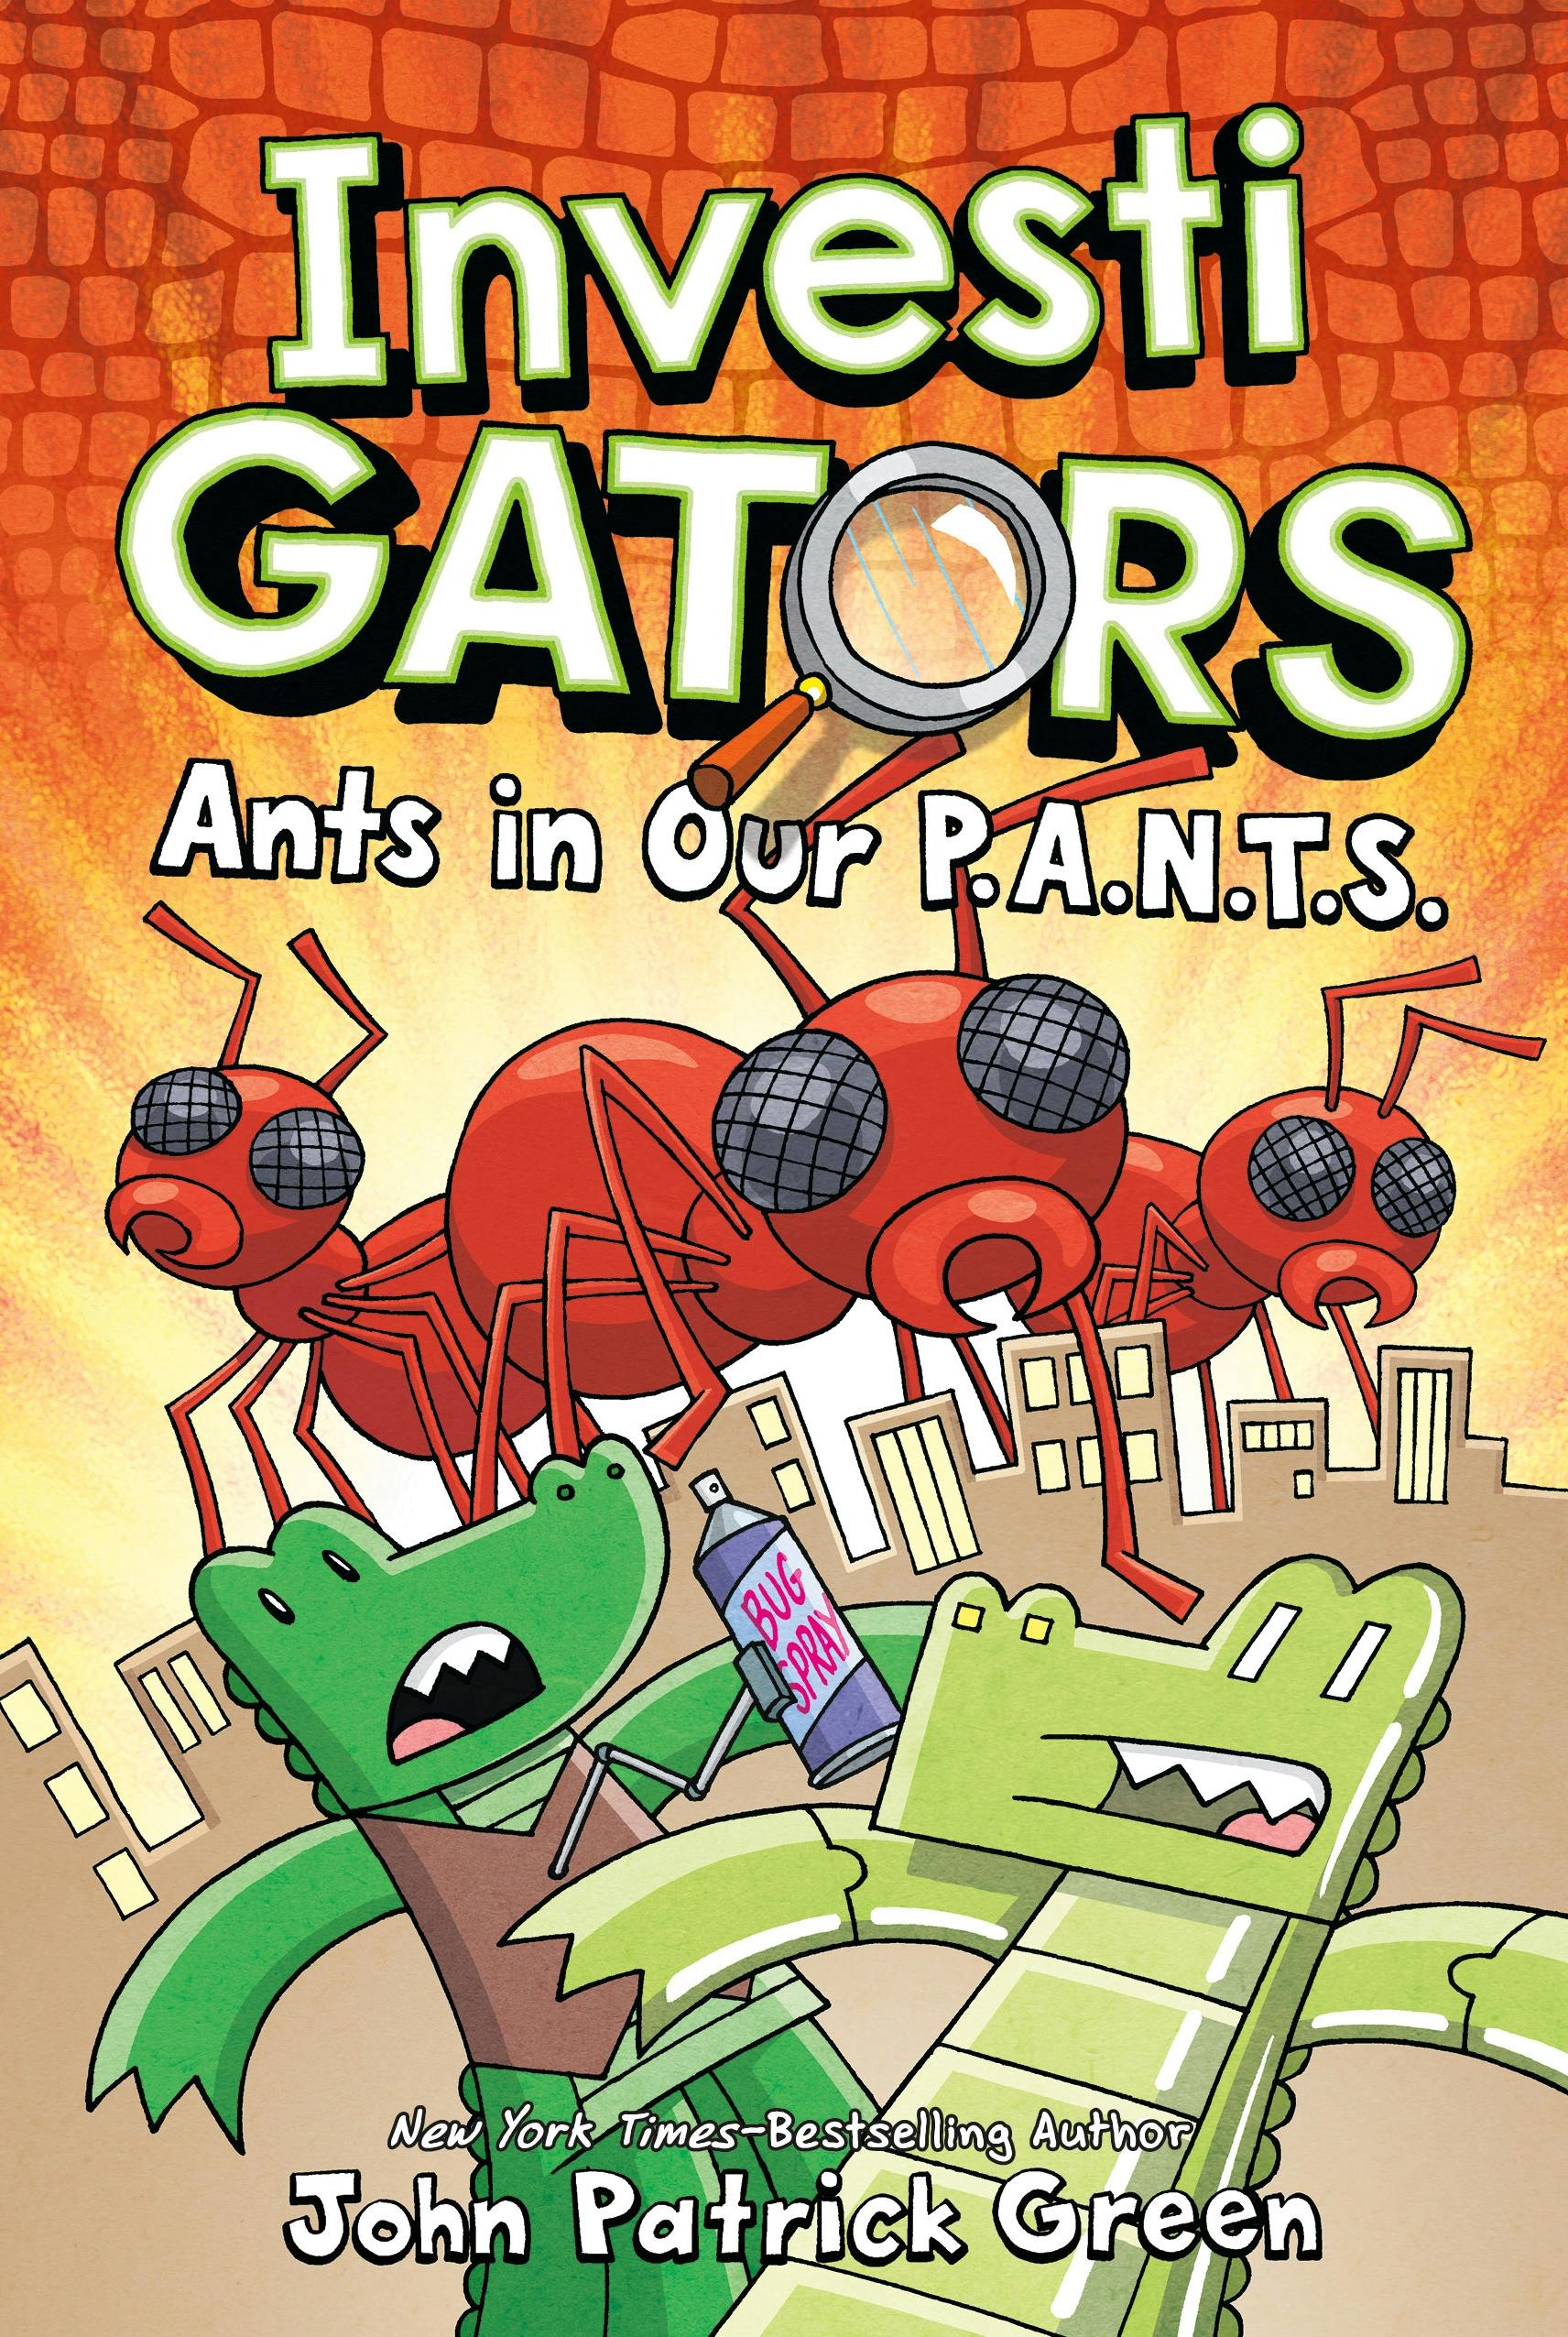 Ants in Your Pants - Wikipedia